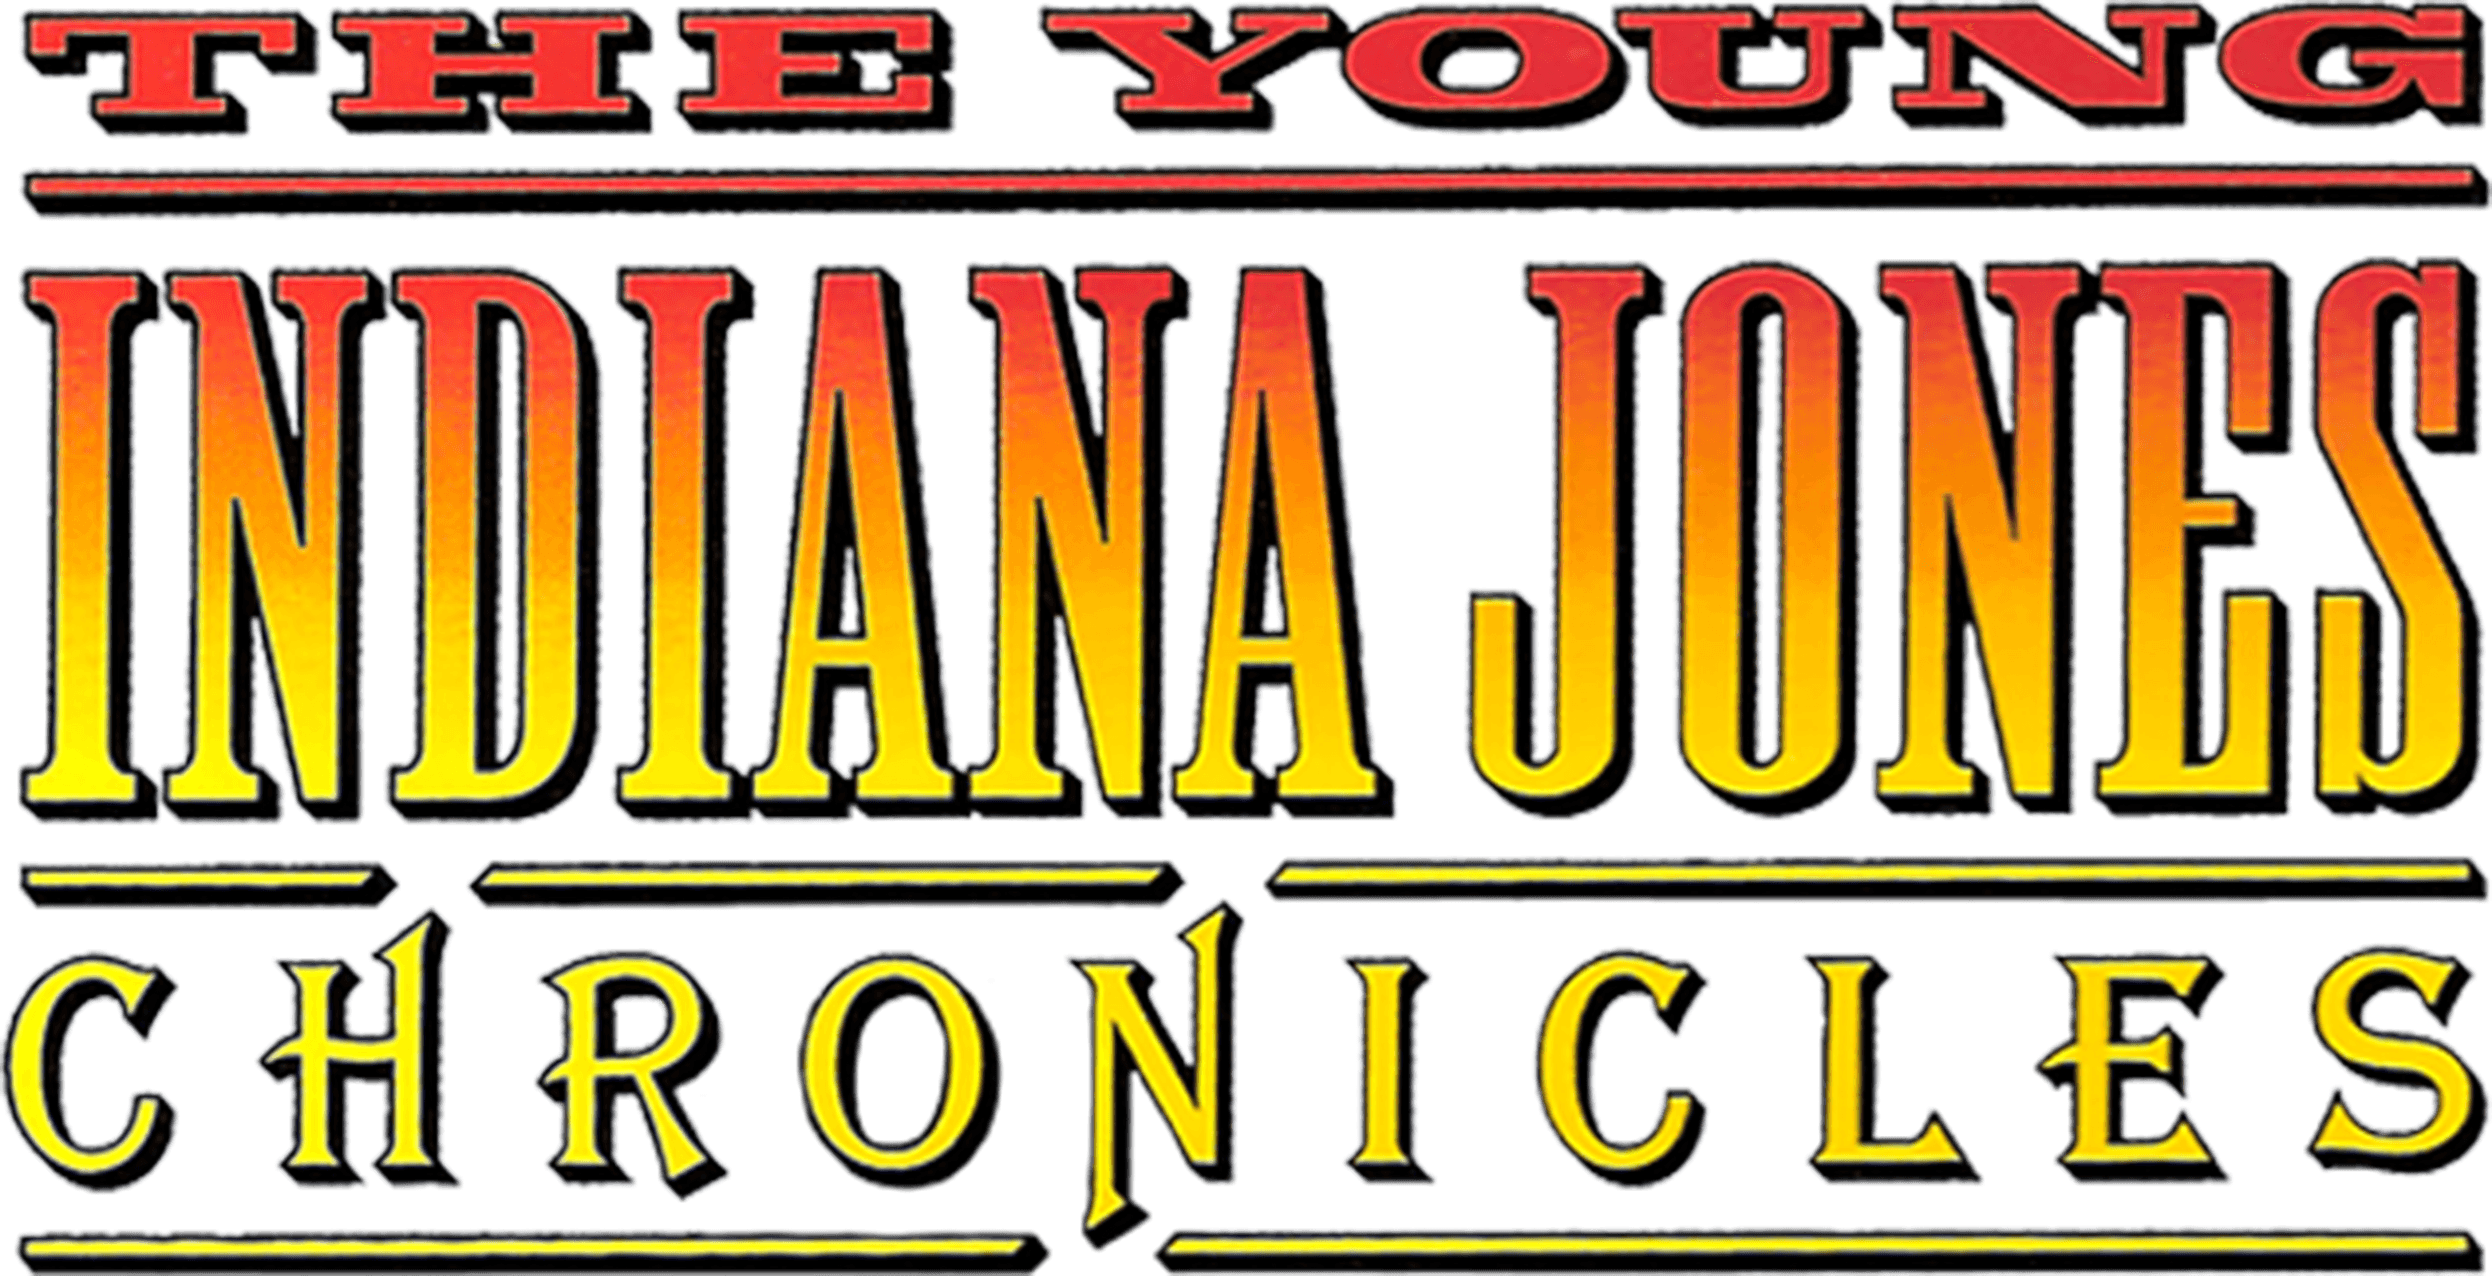 The Young Indiana Jones Chronicles logo